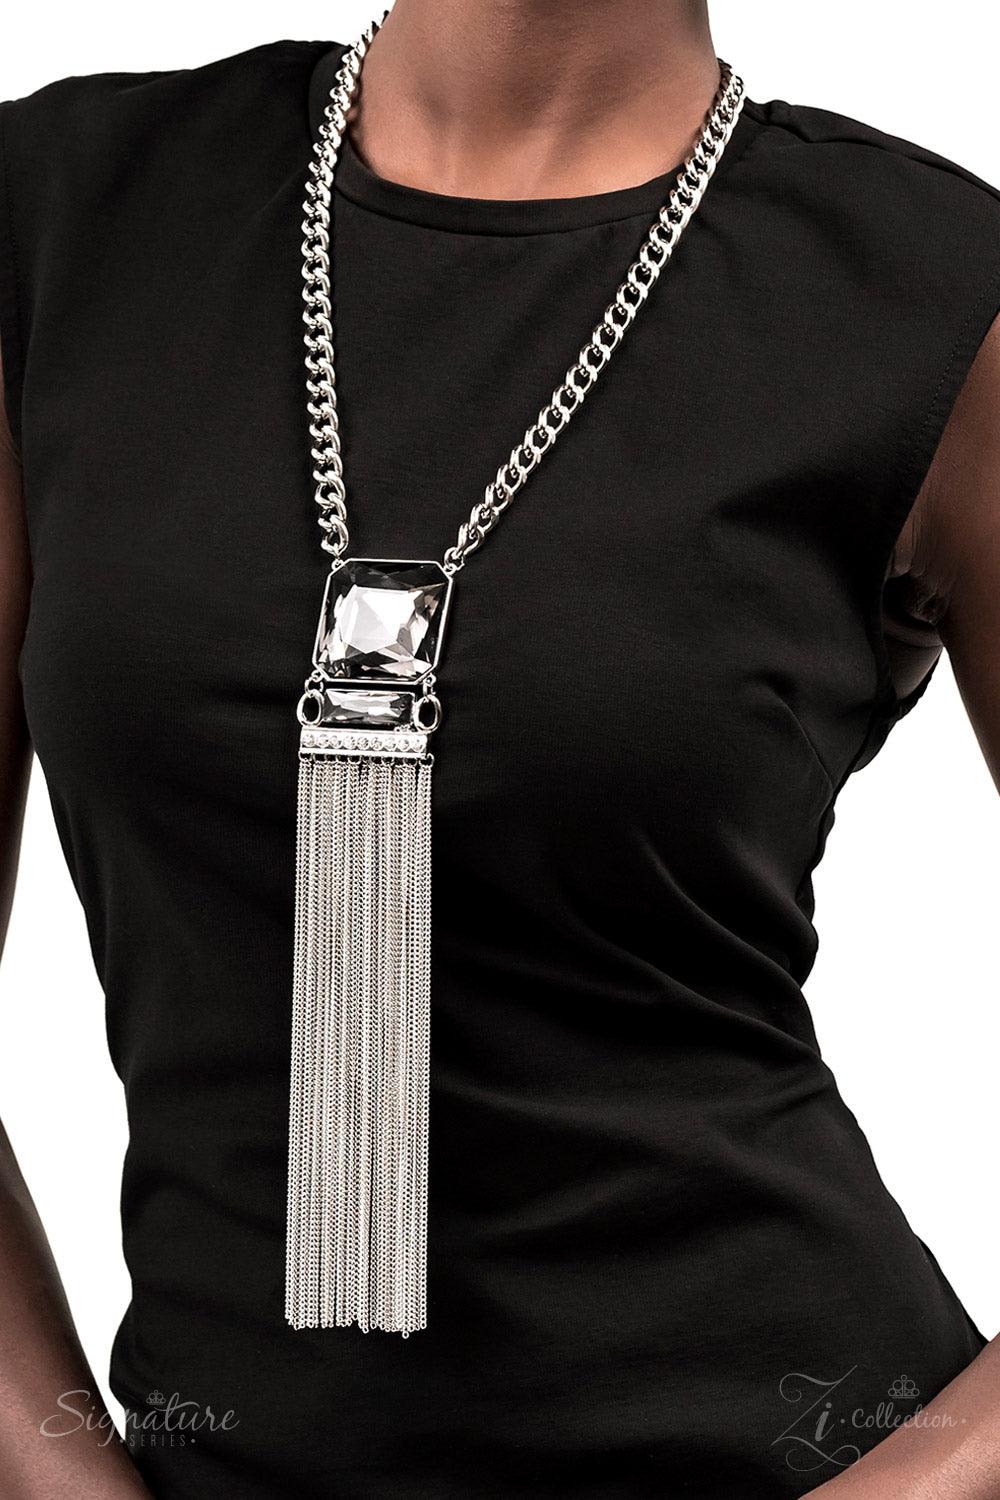 Paparazzi Accessories The Hope A dramatically oversized, smoky, Asscher cut gem sits boldly at the bottom of a thick silver chain, creating a majestic focal point. An emerald cut gem in the same smoky hue connects to the bottom of the large centerpiece, f